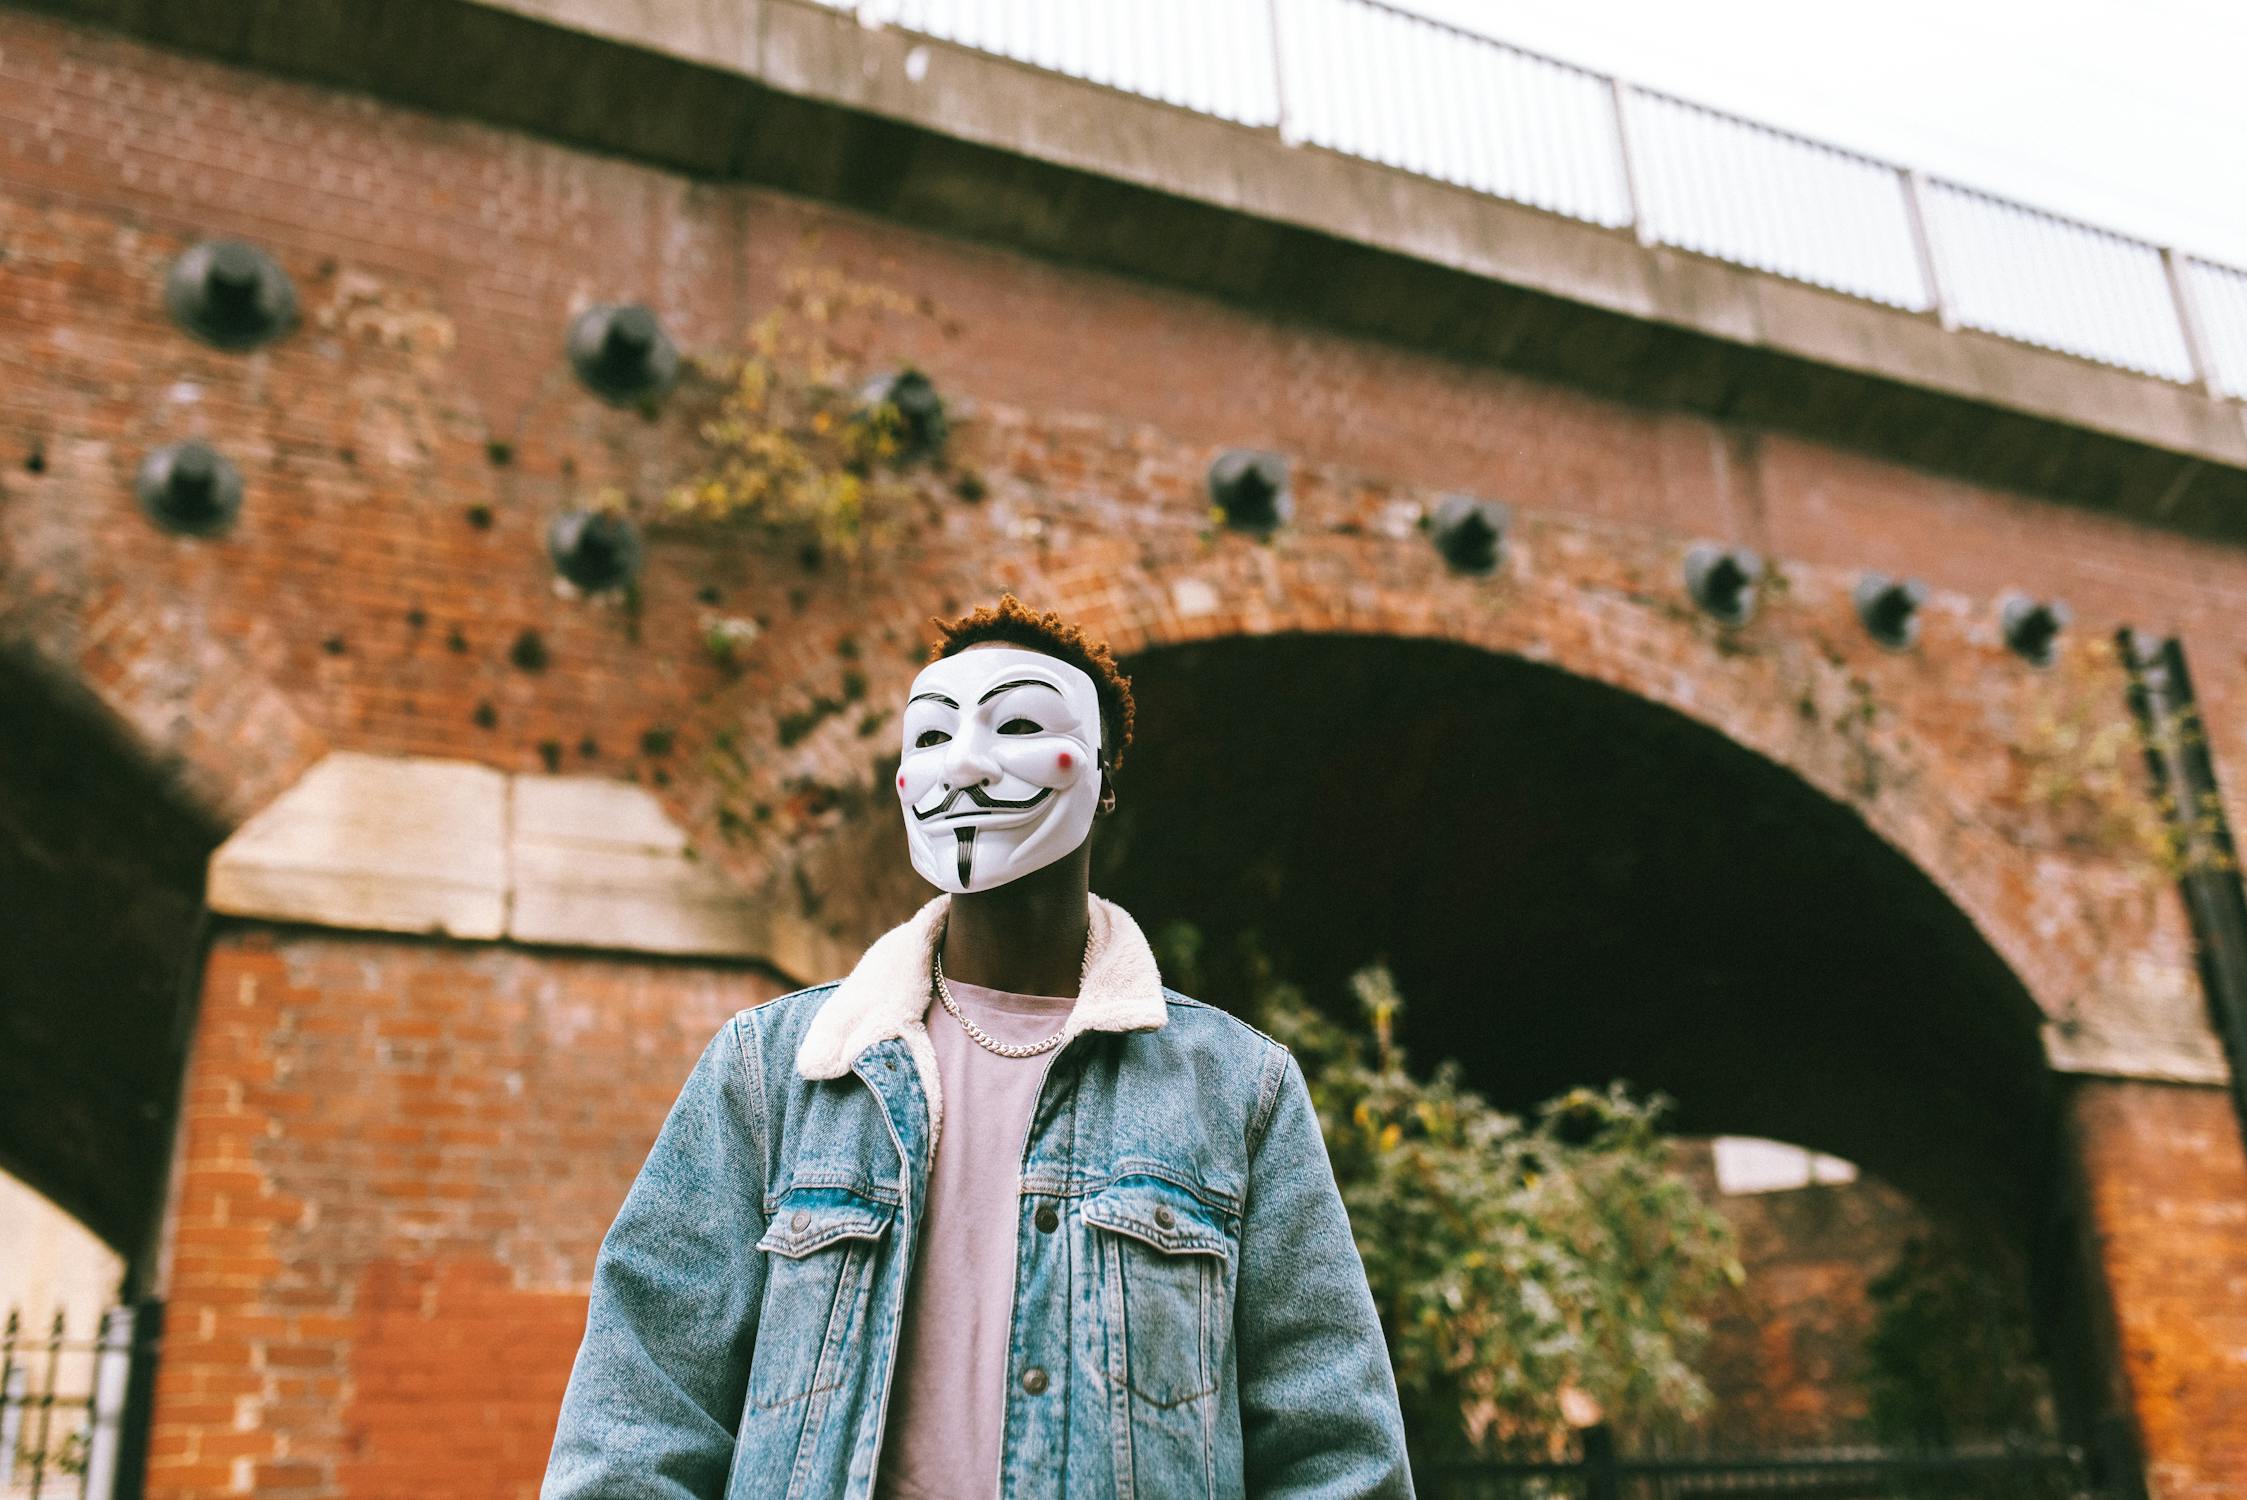 Man with mask in front of brick building